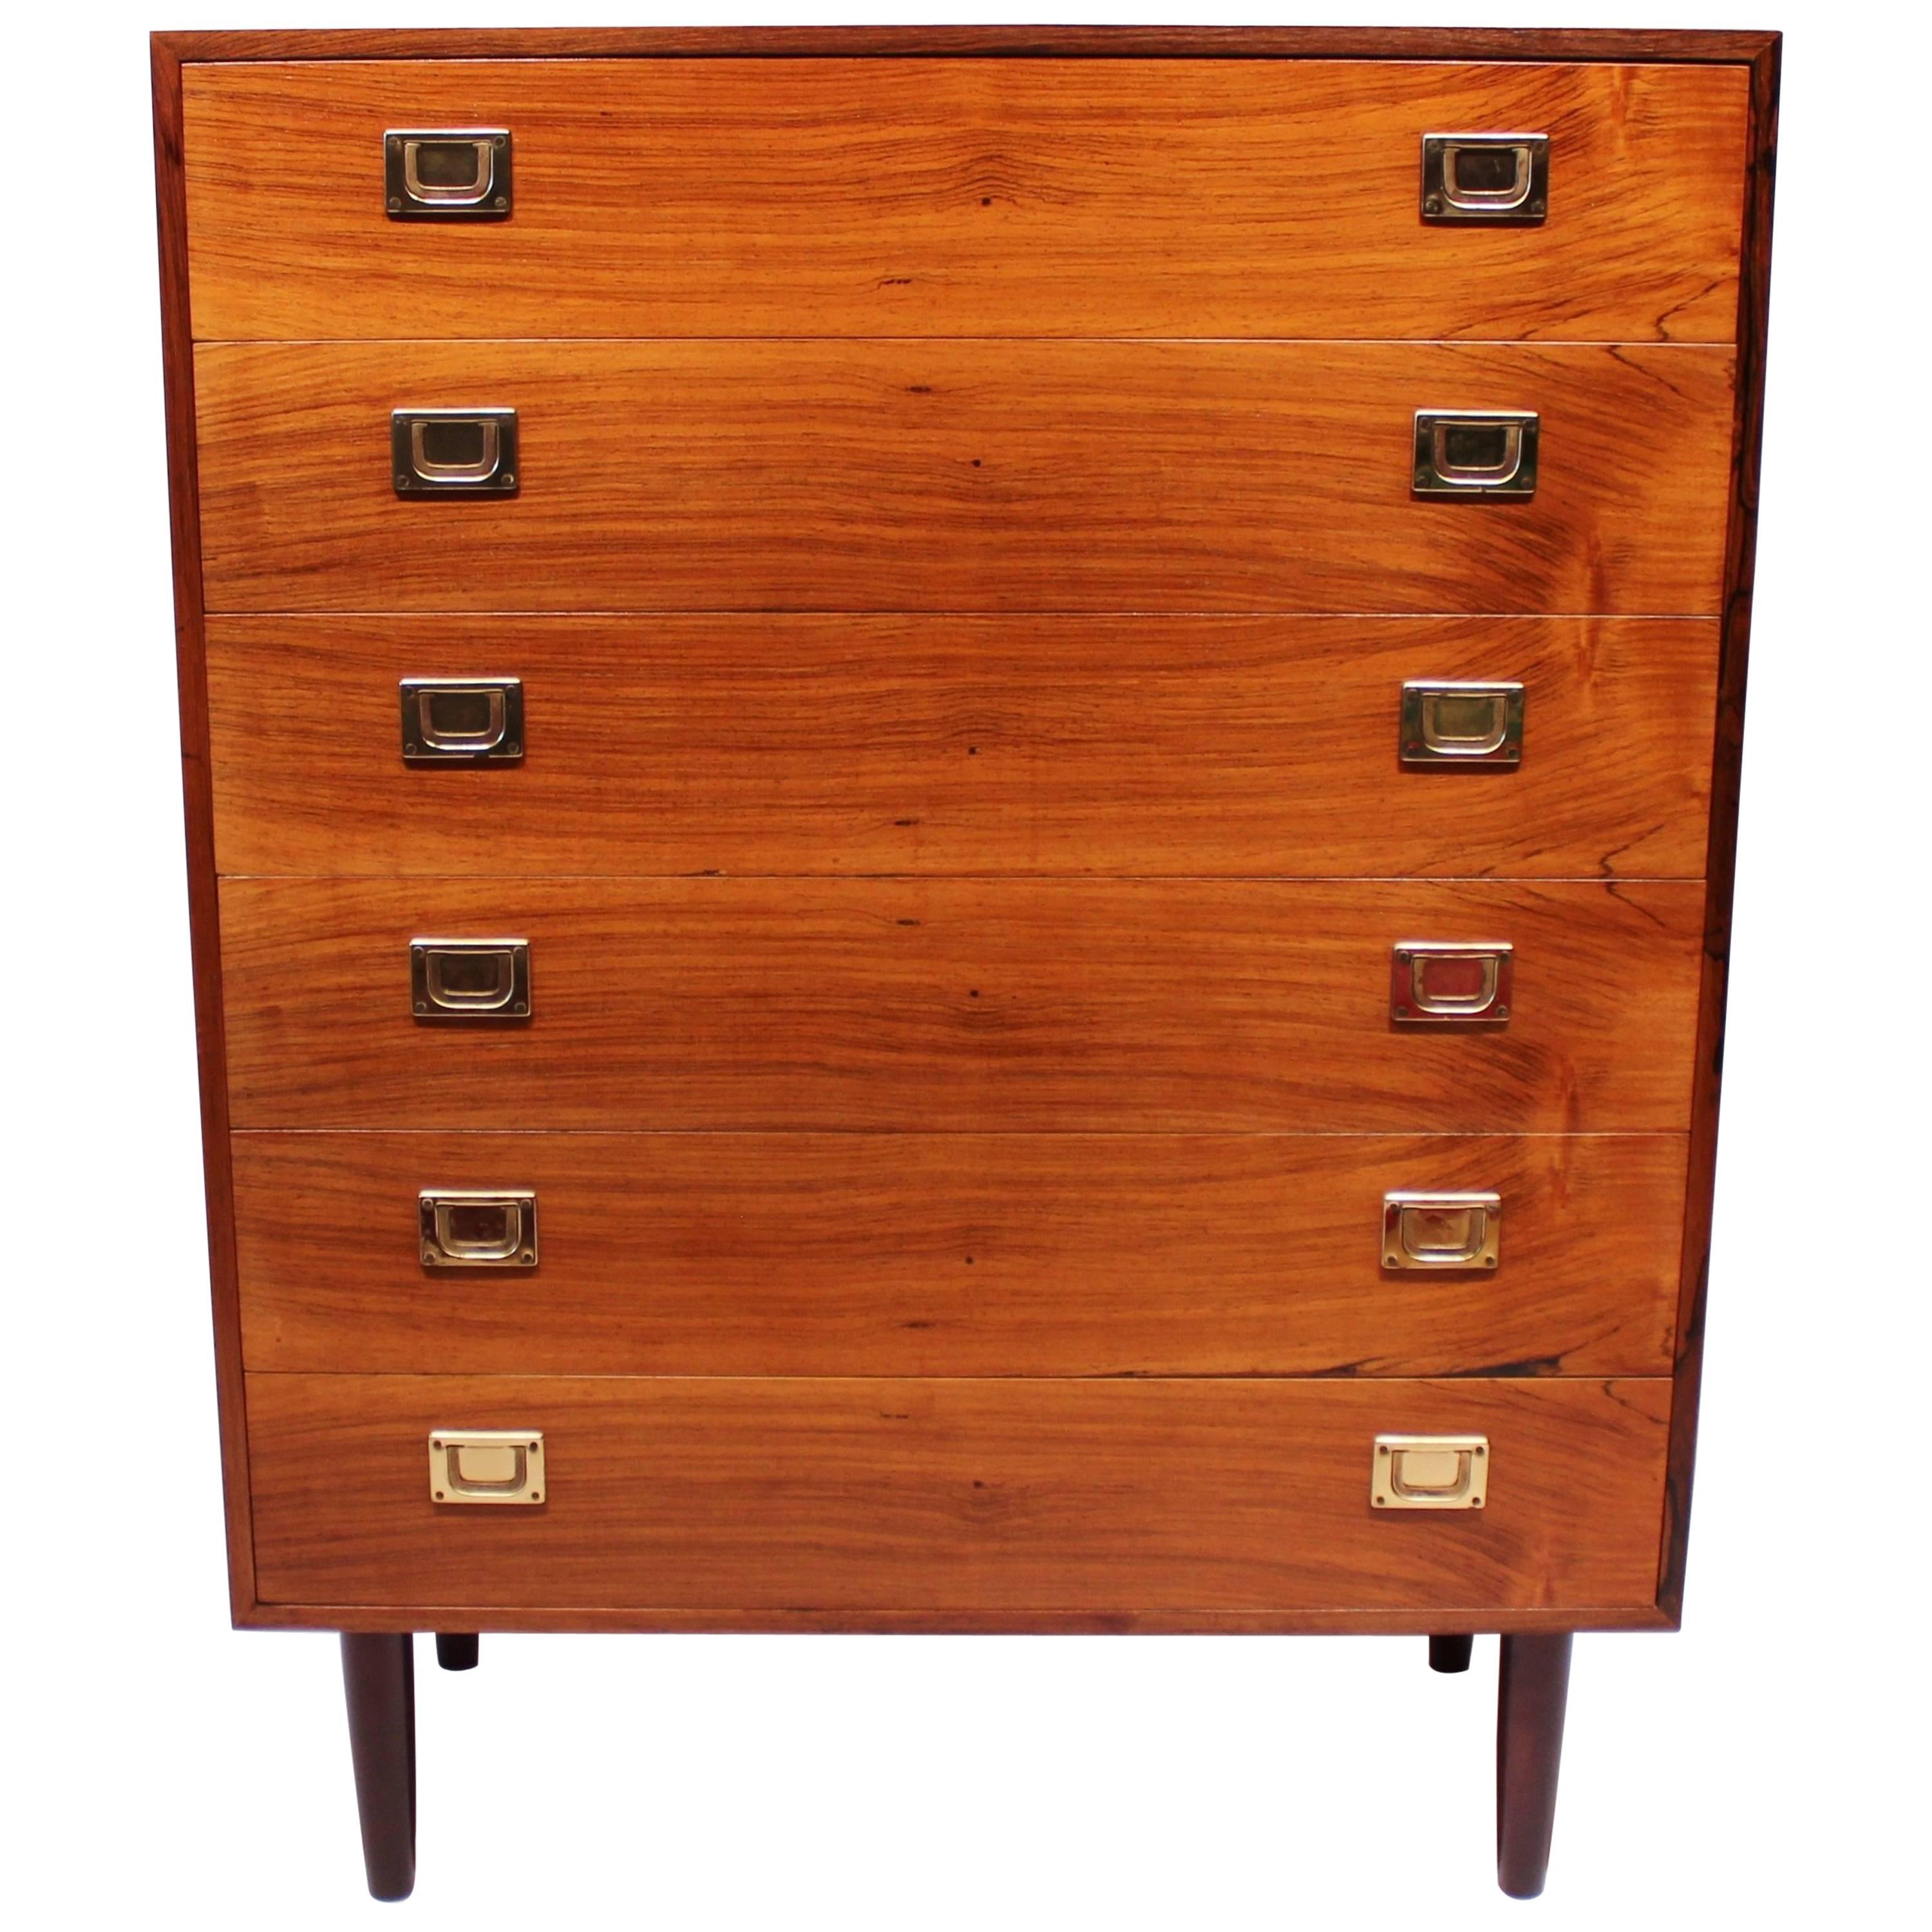 Chest of Drawers in Rosewood by Reoval, Danish Design, 1960s